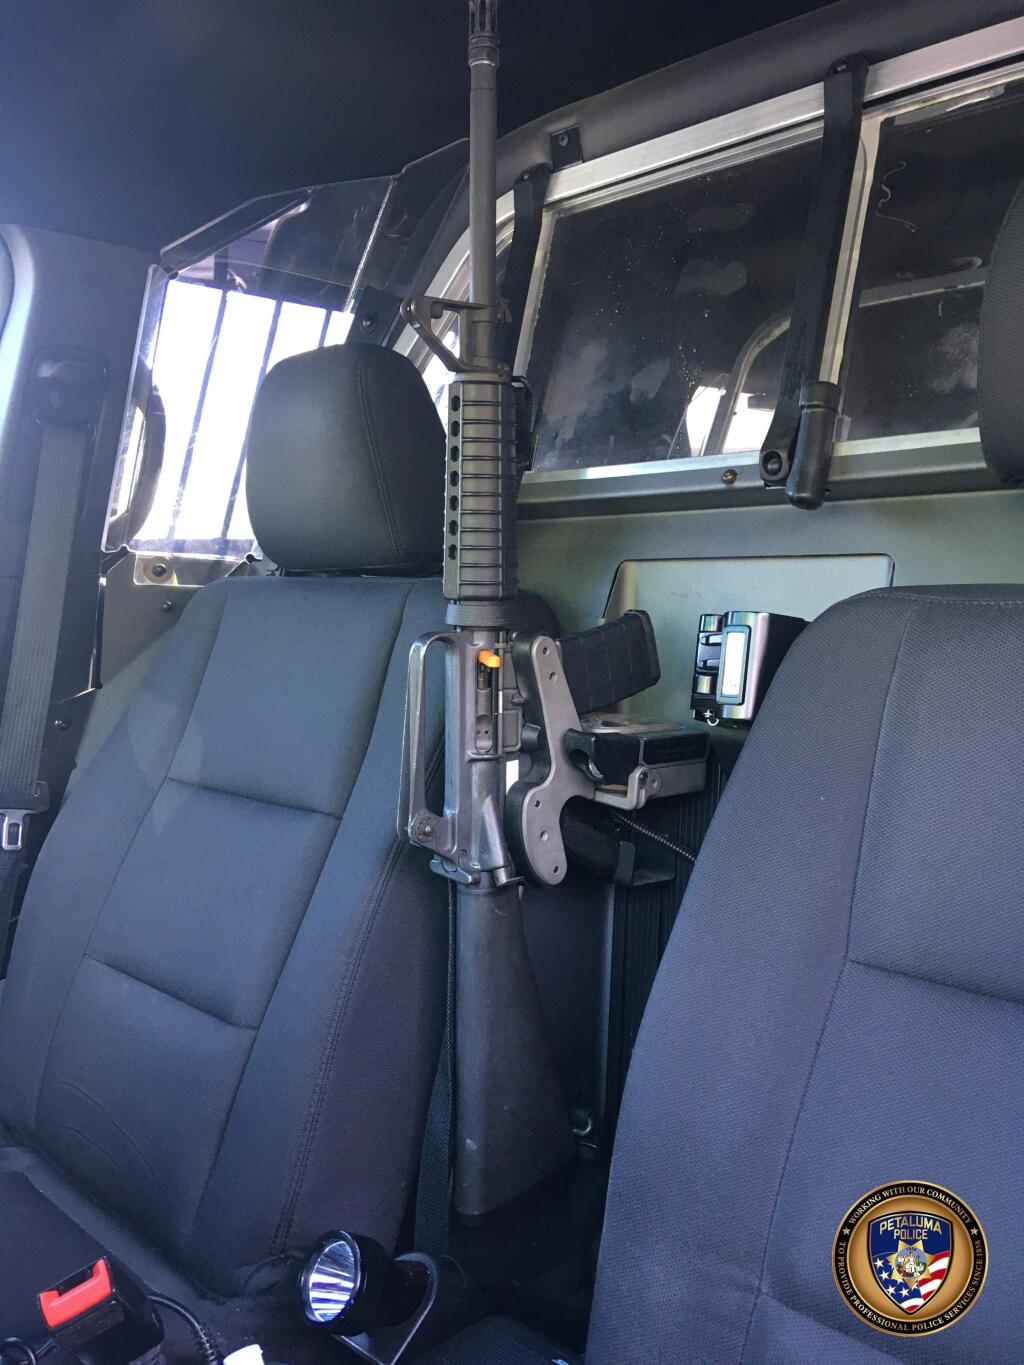 A Petaluma Police Department Colt M16-A1 rifle is locked in a rifle rack inside a police car. PETALUMA POLICE DEPARTMENT